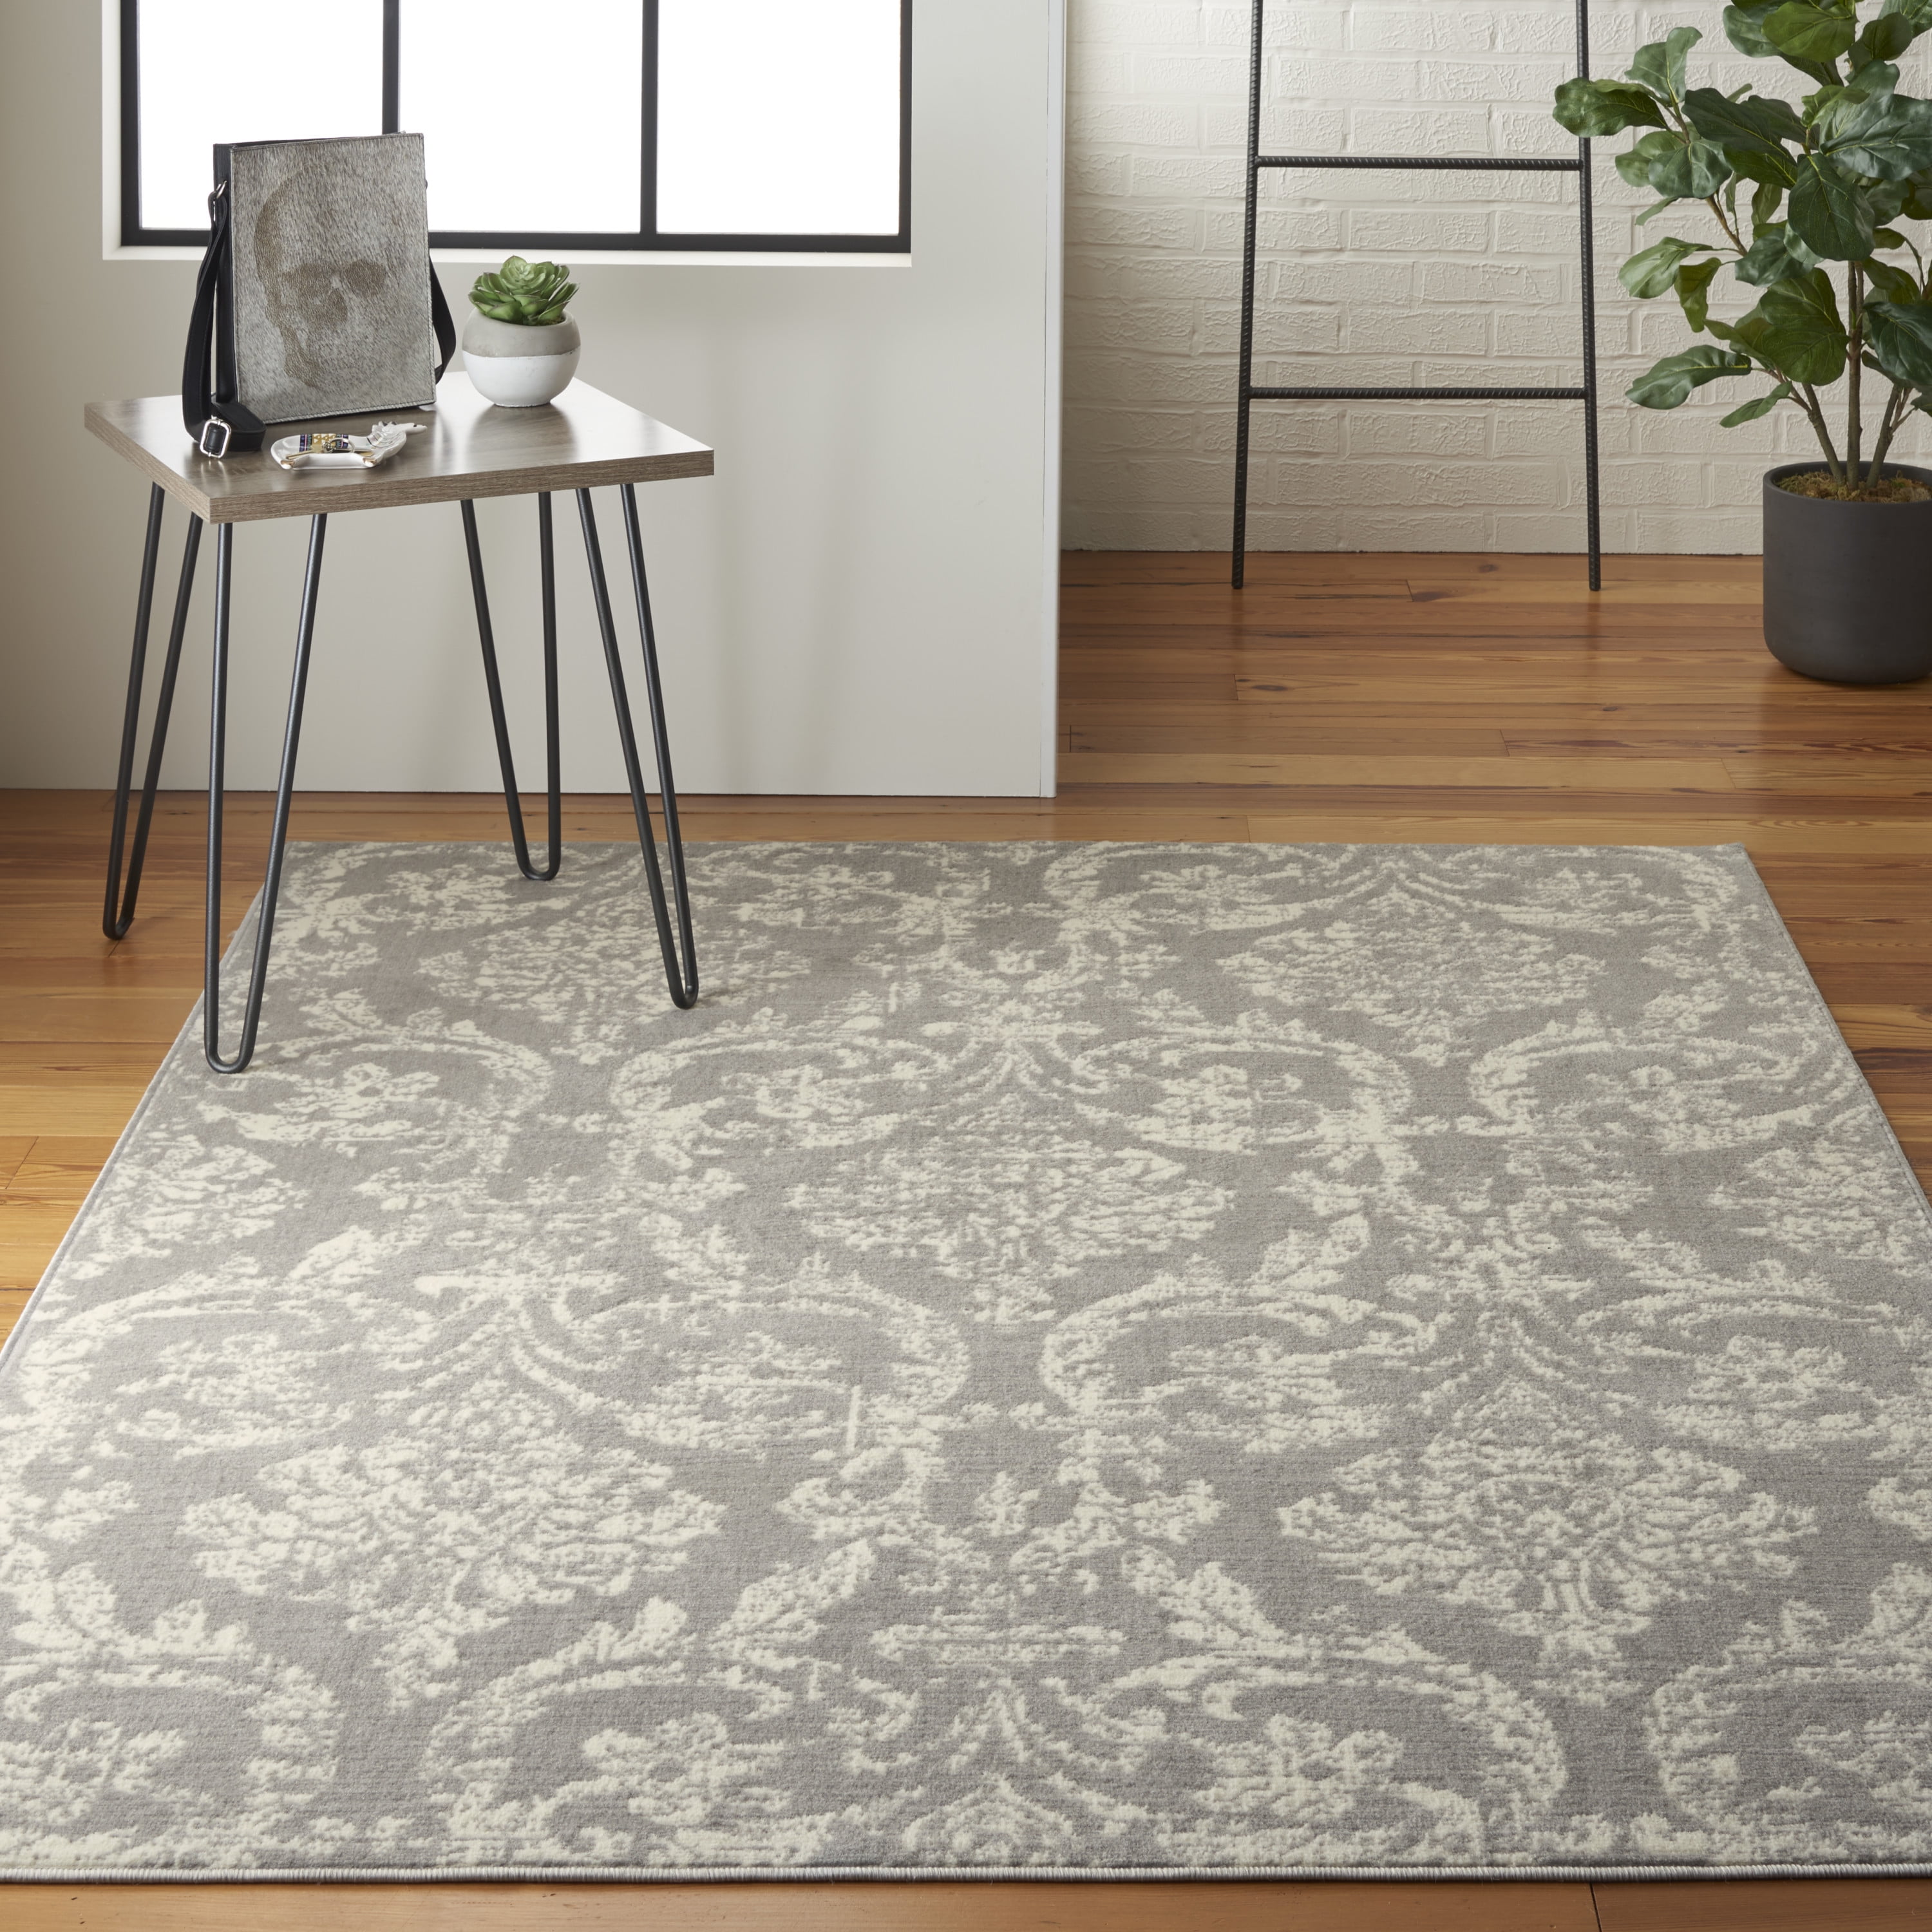 Highlawn Damask Indoor / Outdoor Area Rug in Yellow/Black/White Andover Mills Rug Size: Rectangle 7'9 x 10'6